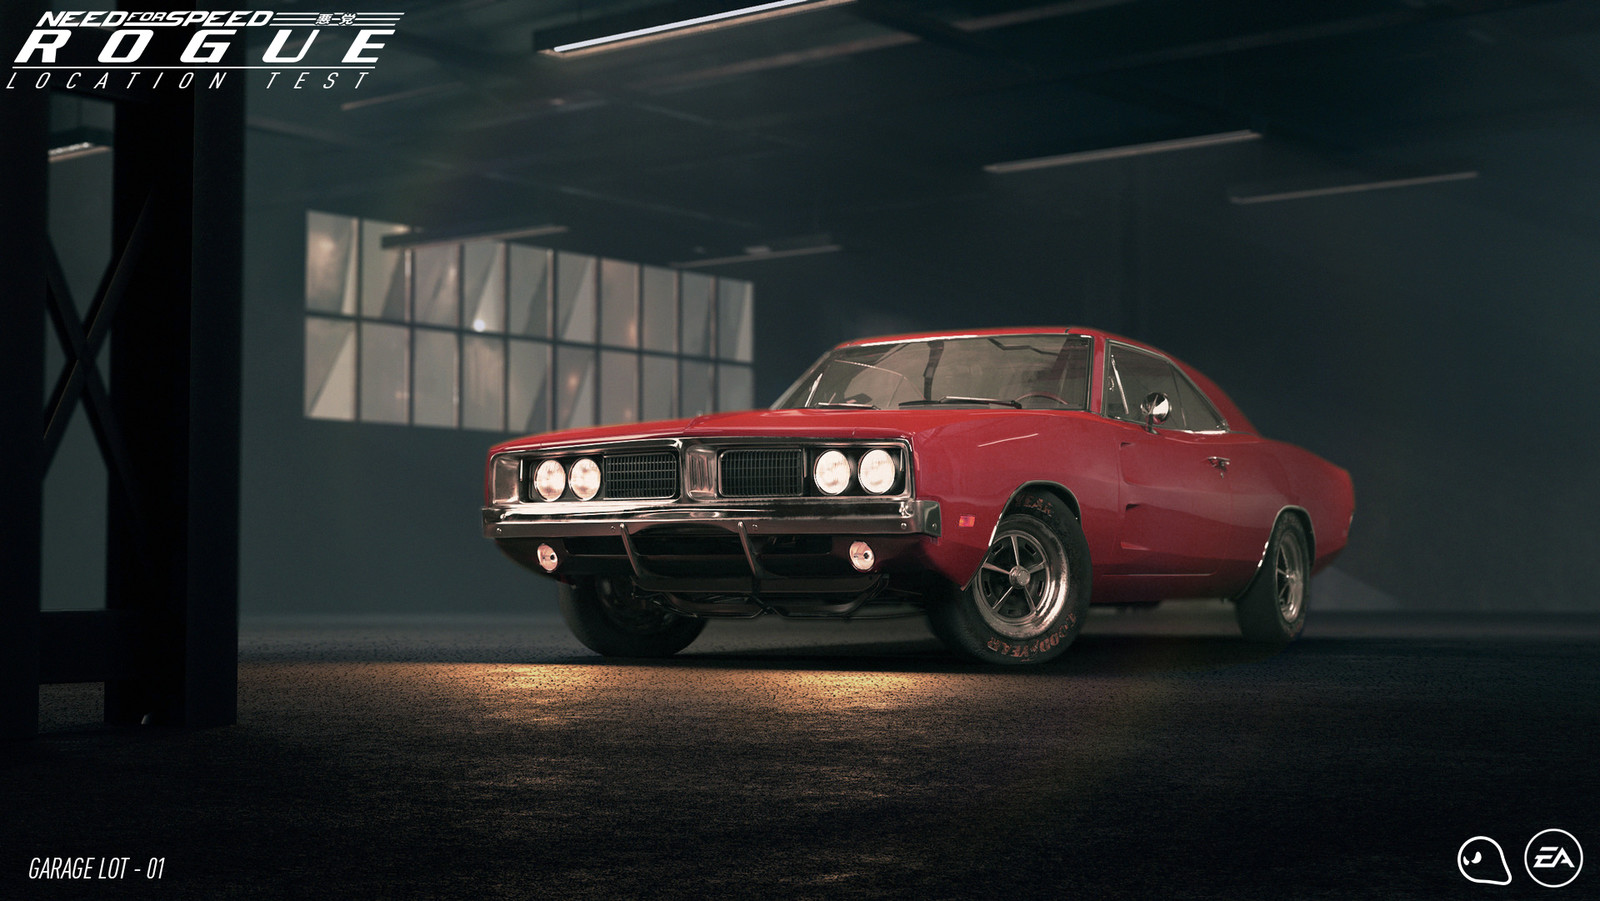 Need for Speed Rogue (Location Test - 2) [Original Image by Mikhail Sharov]